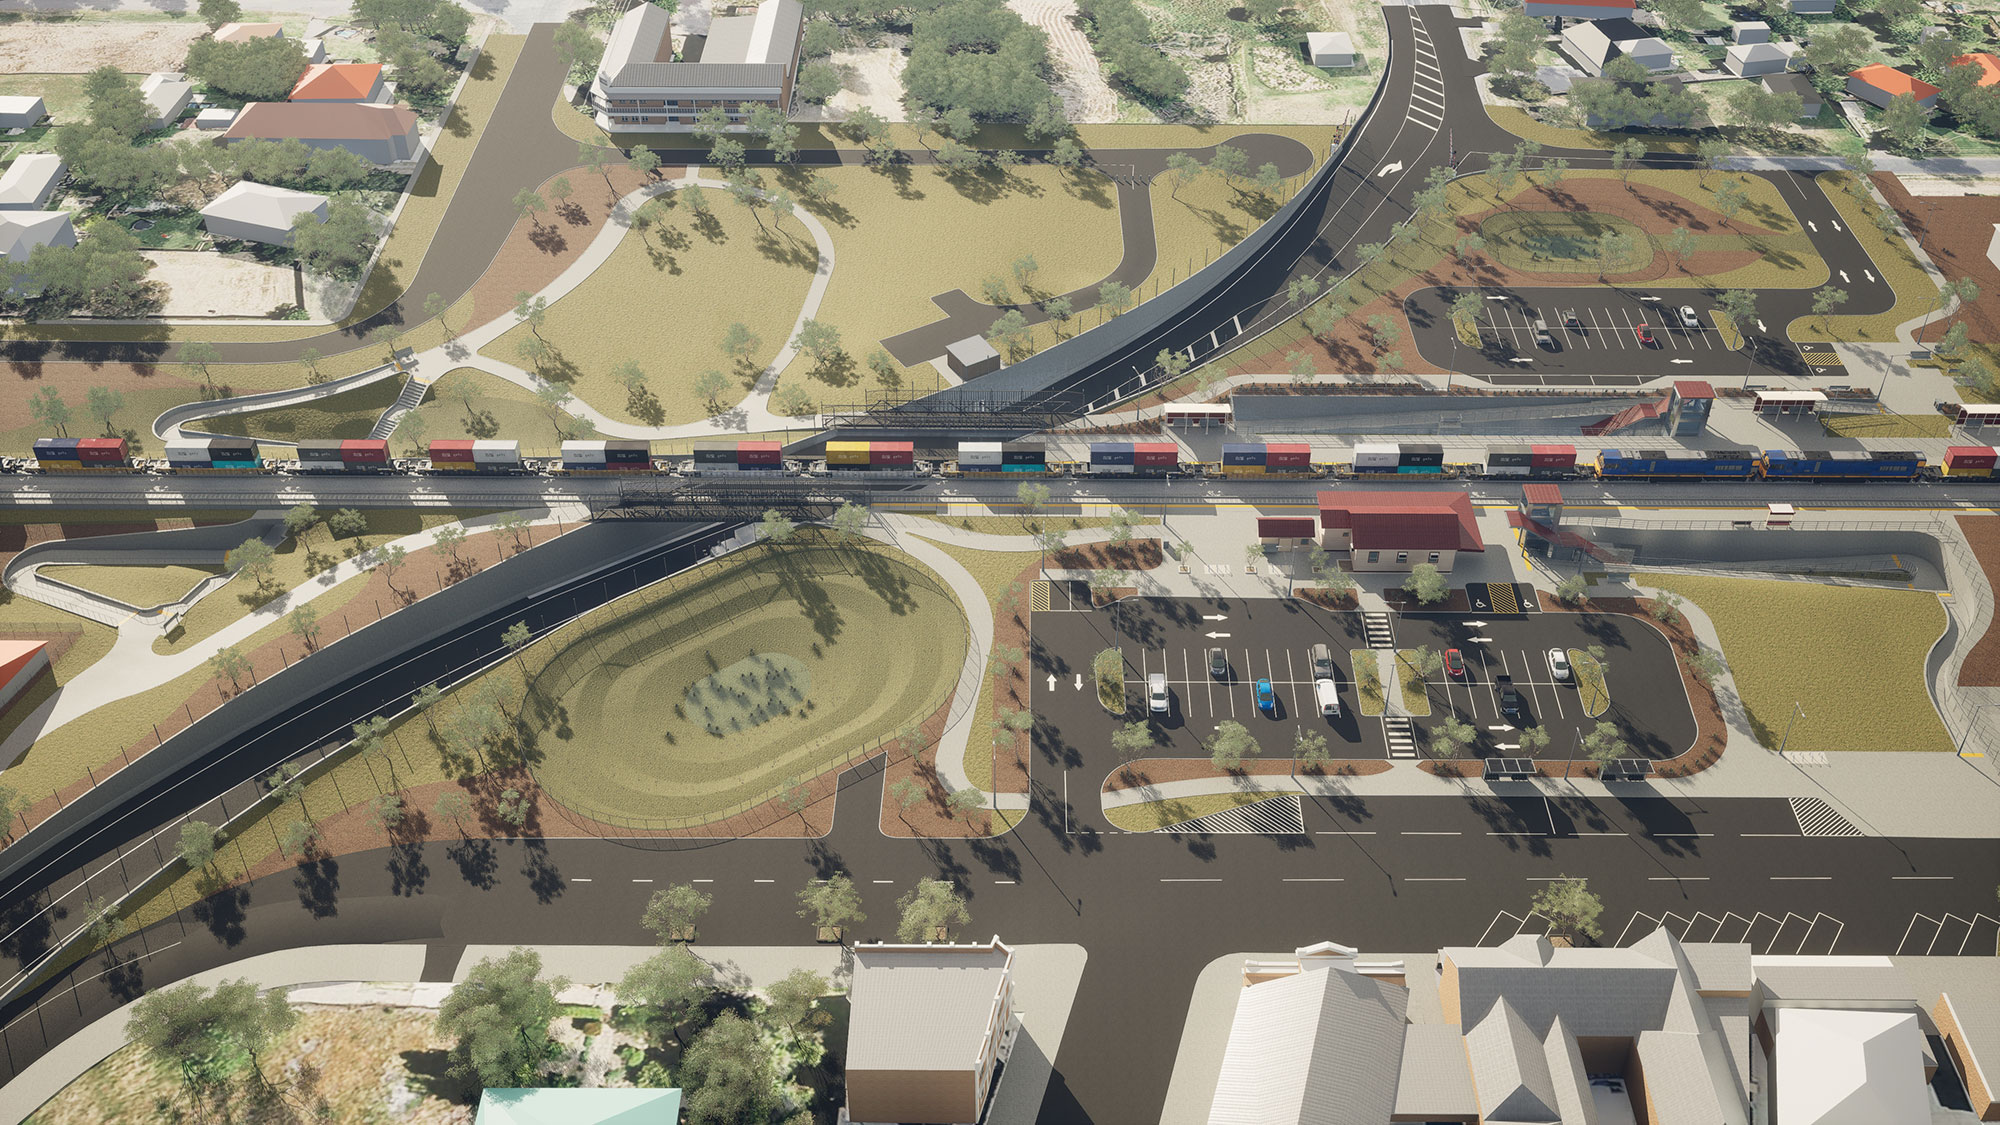 Visualisation looking from Railway Place across the Euroa Station precinct and Anderson Street underpass